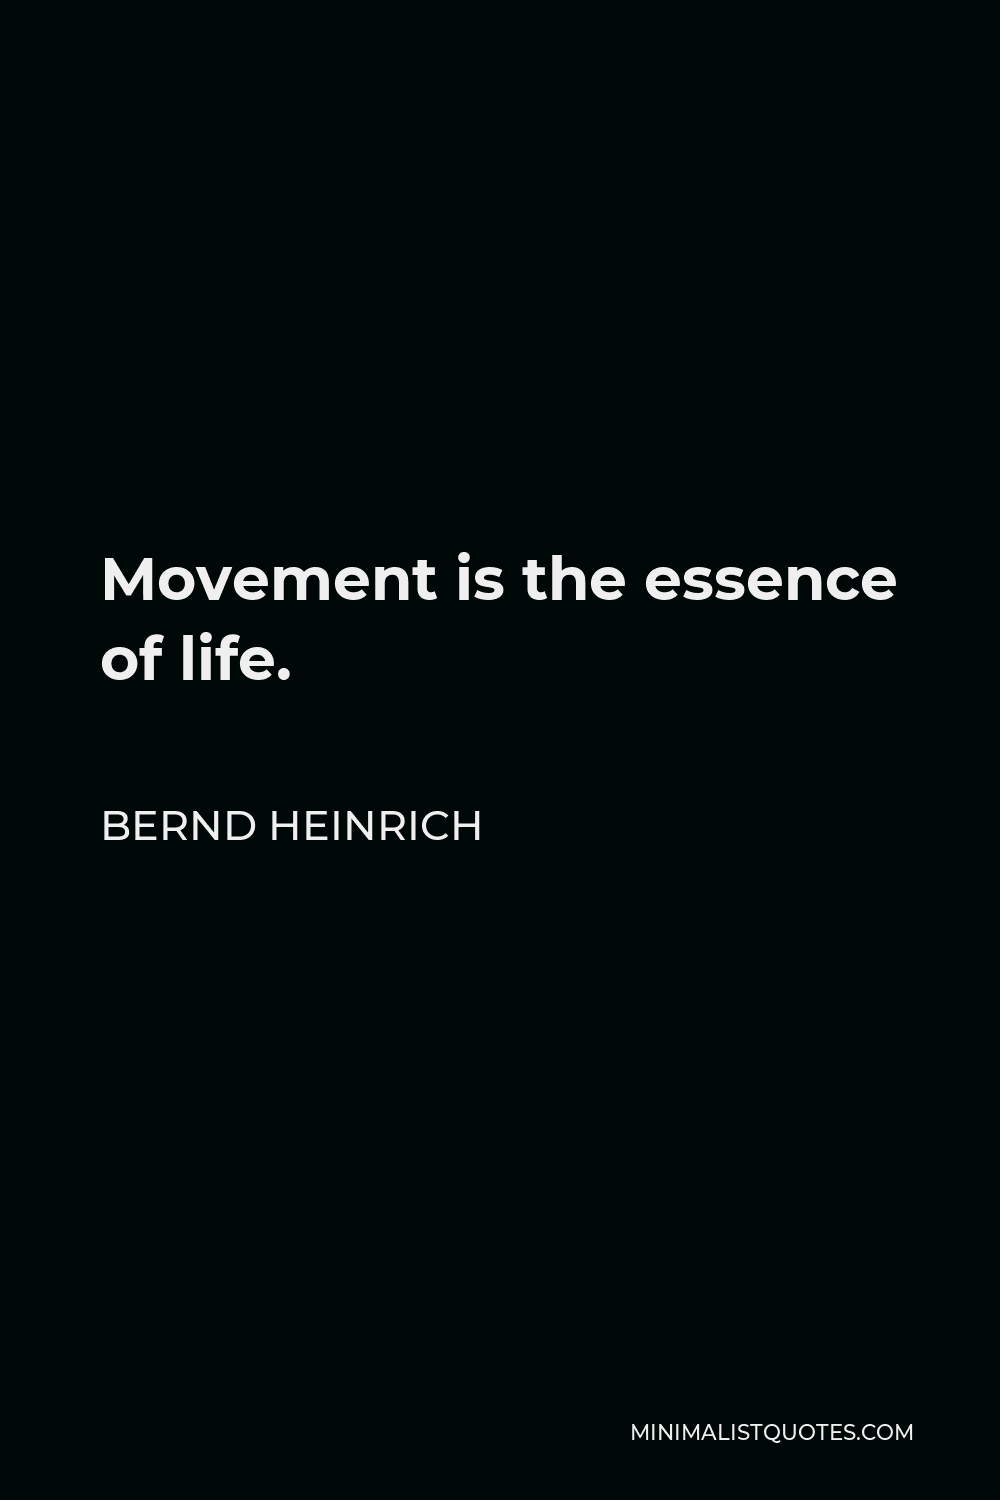 Bernd Heinrich Quote - Movement is the essence of life.